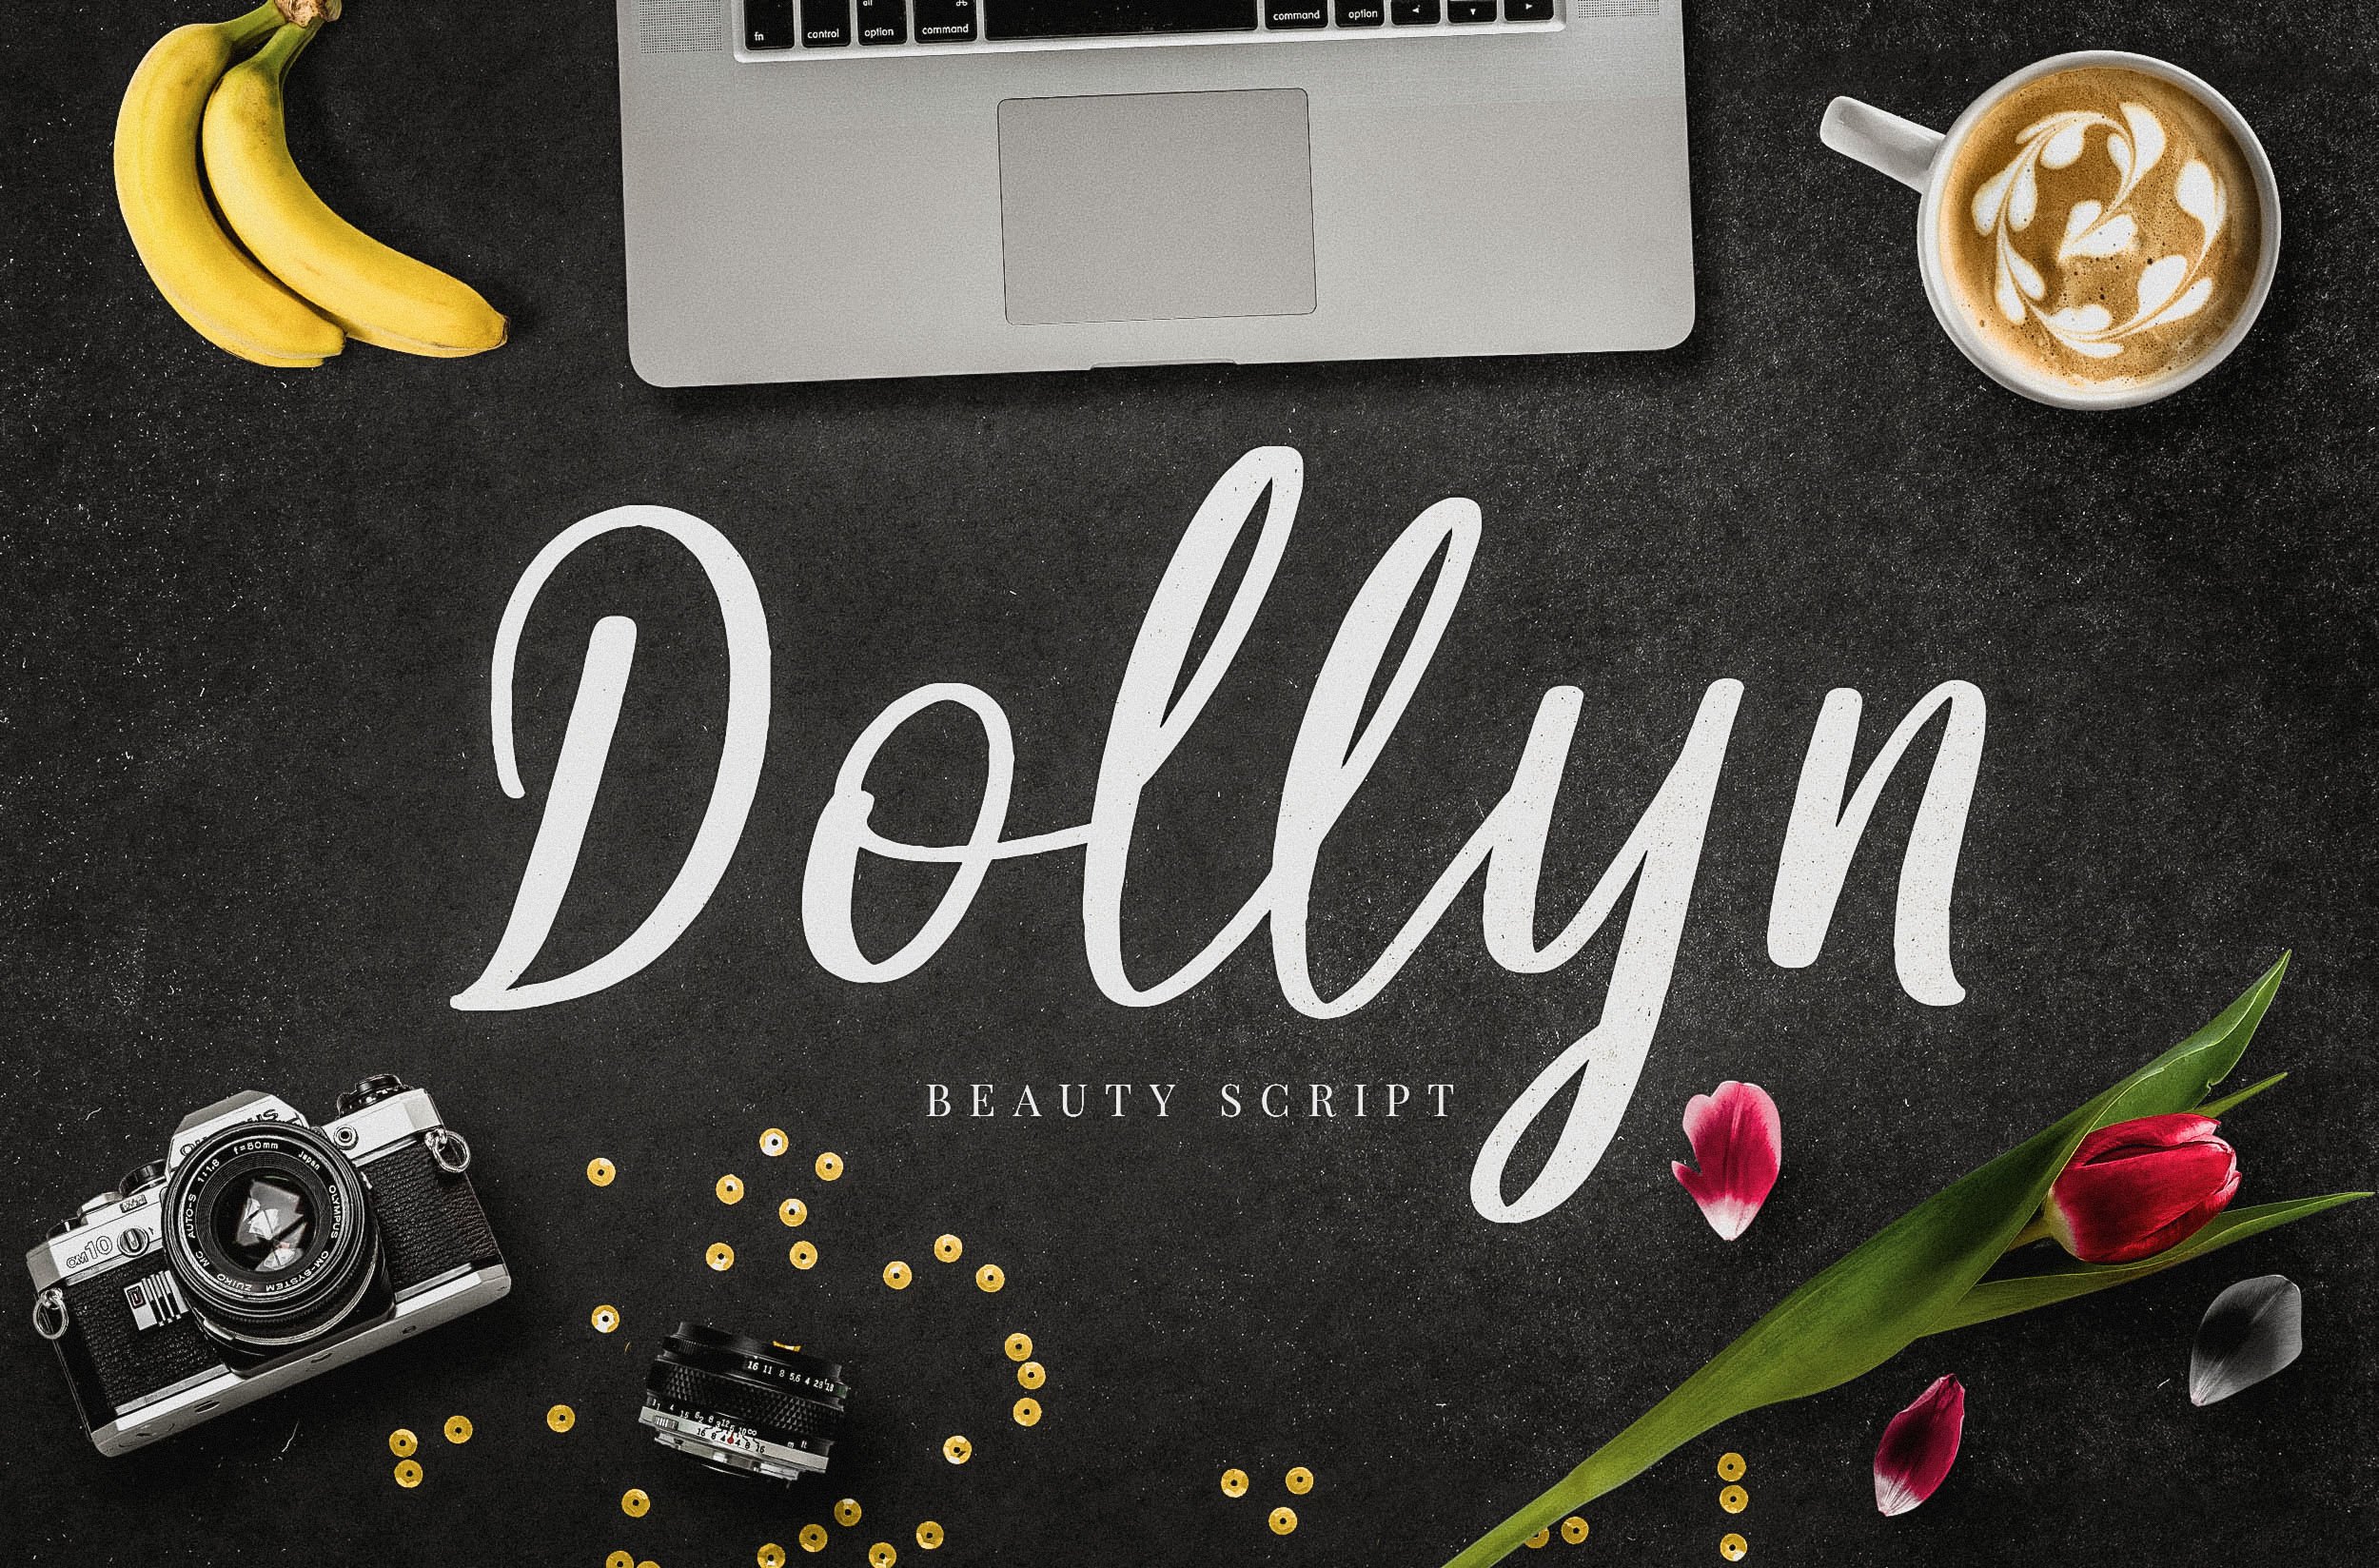 Dollyn Script - Casual Playful Font cover image.